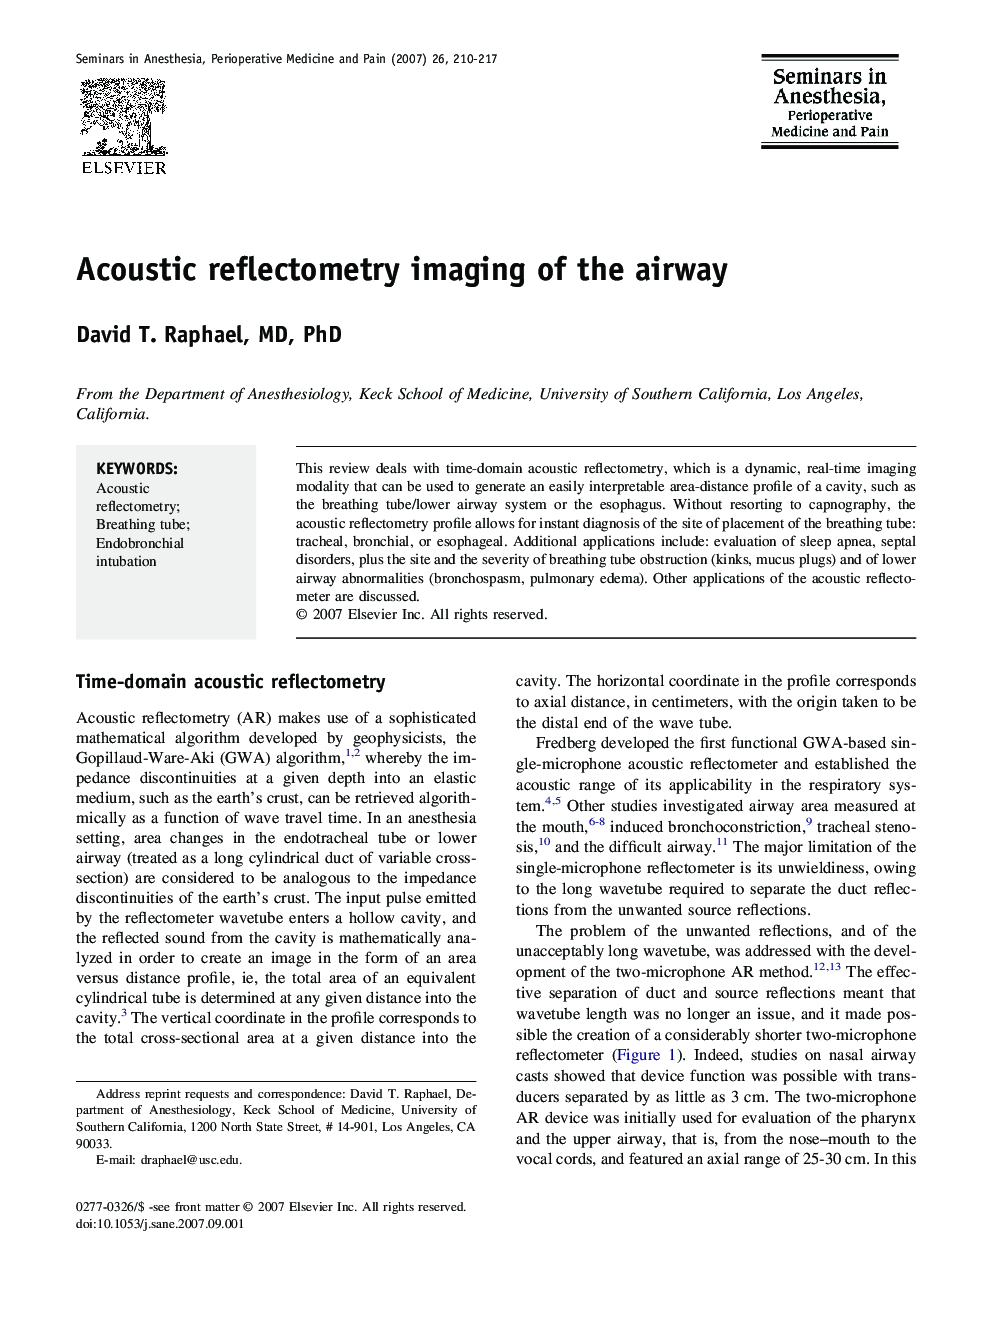 Acoustic reflectometry imaging of the airway